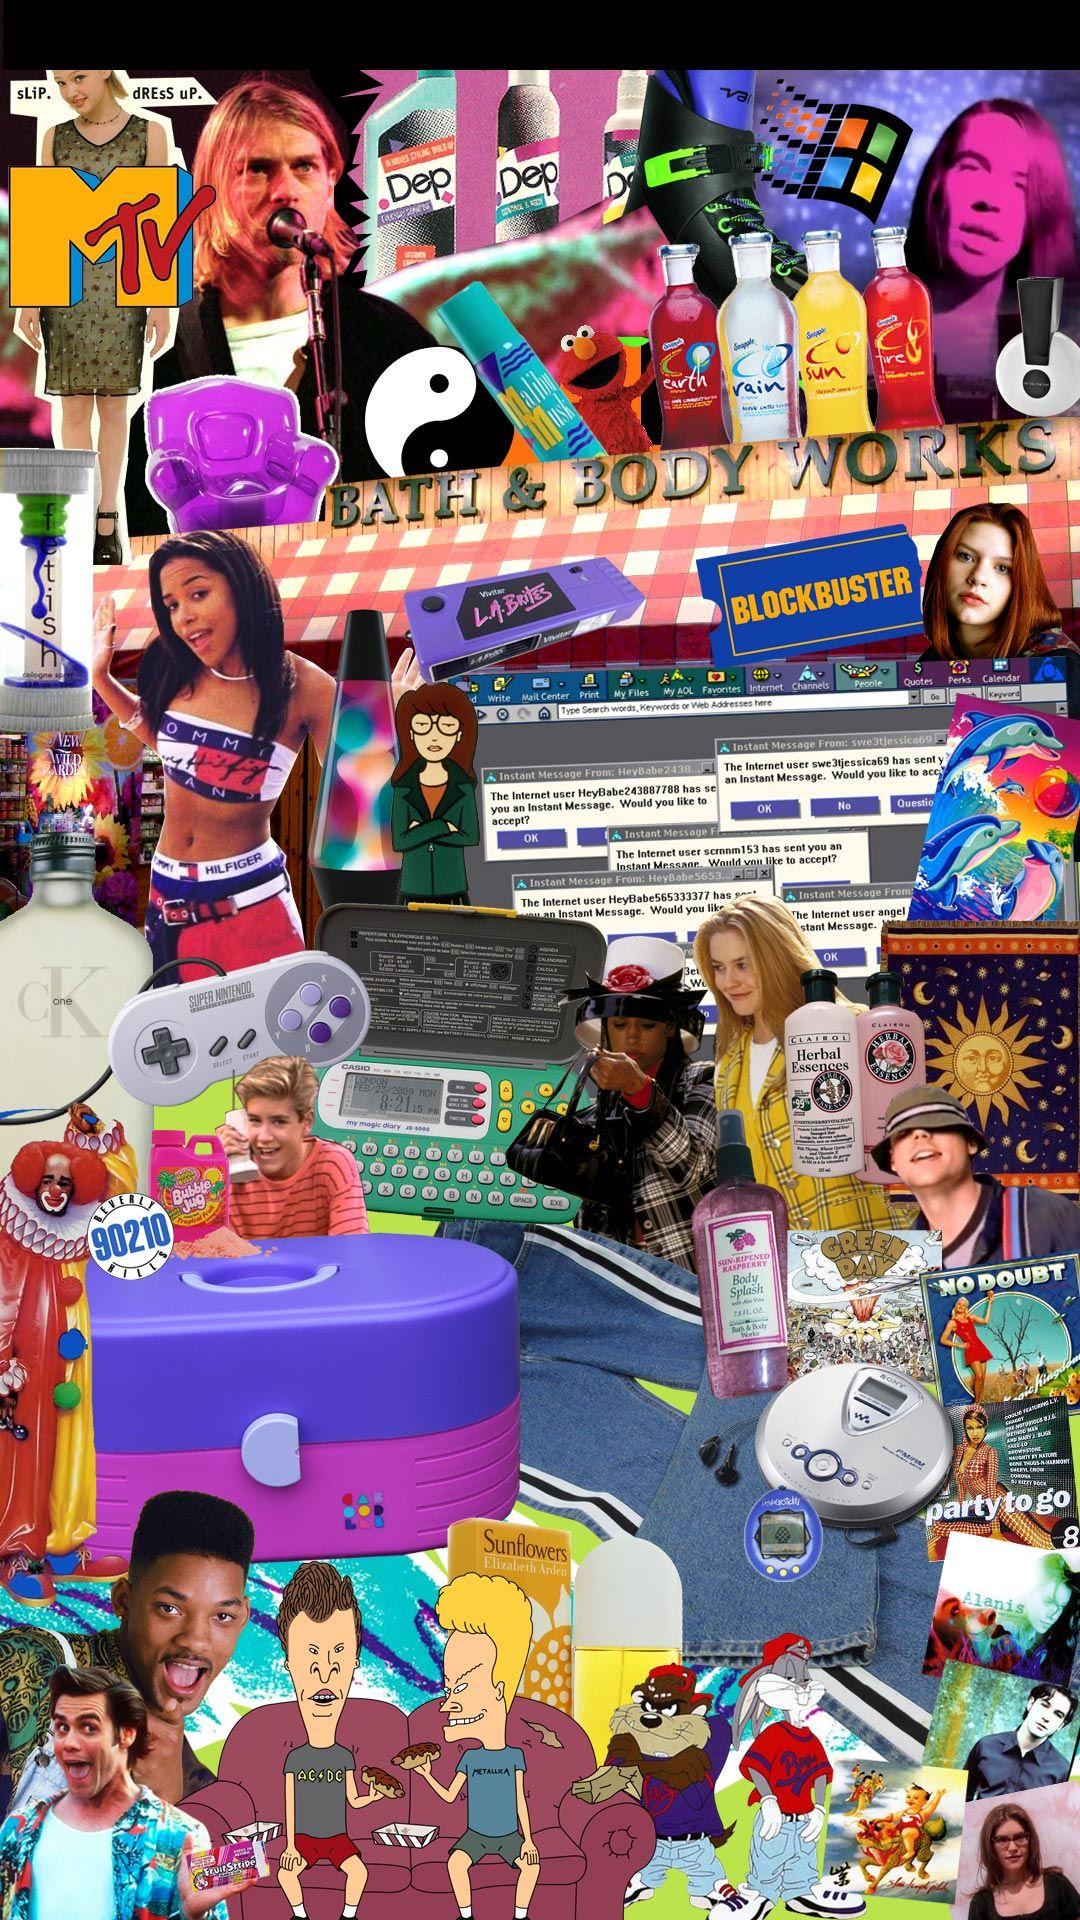 90s collage wallpaper